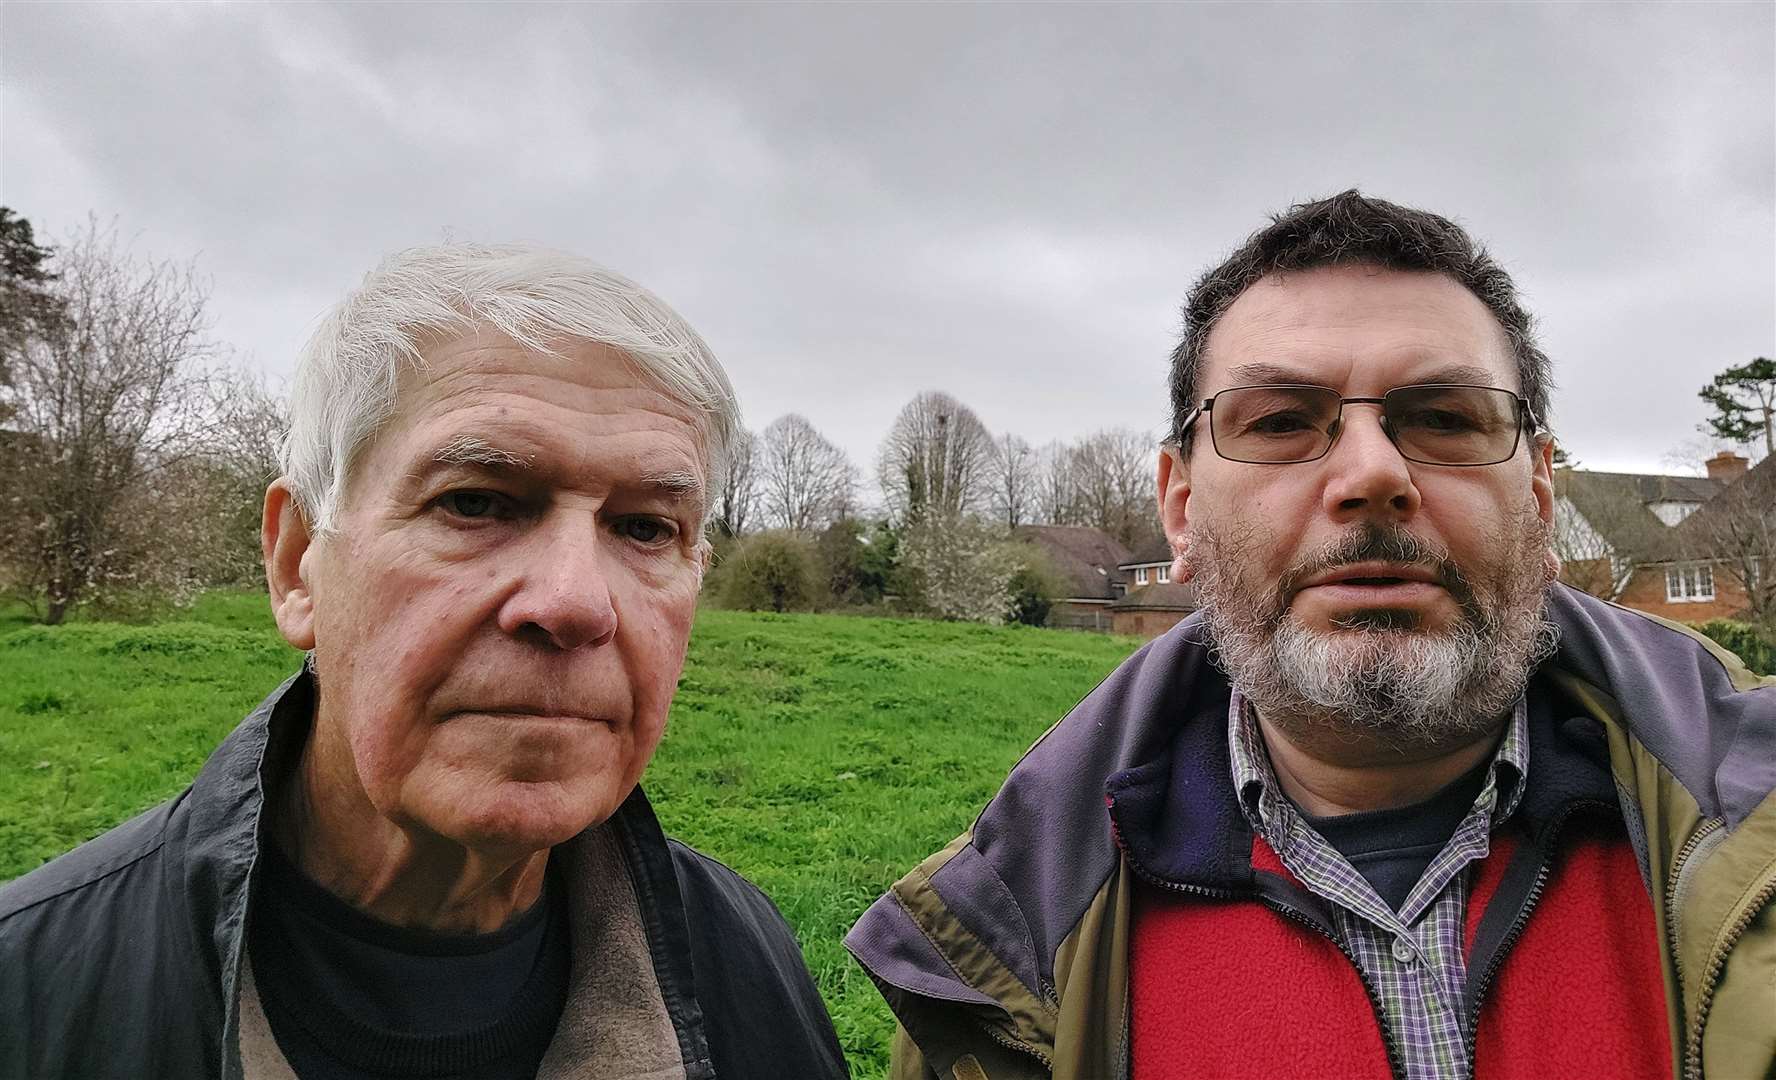 Cllrs Patrick Coates and Paul Harper are campaigning to preserve the former Astor of Hever farmland as green space